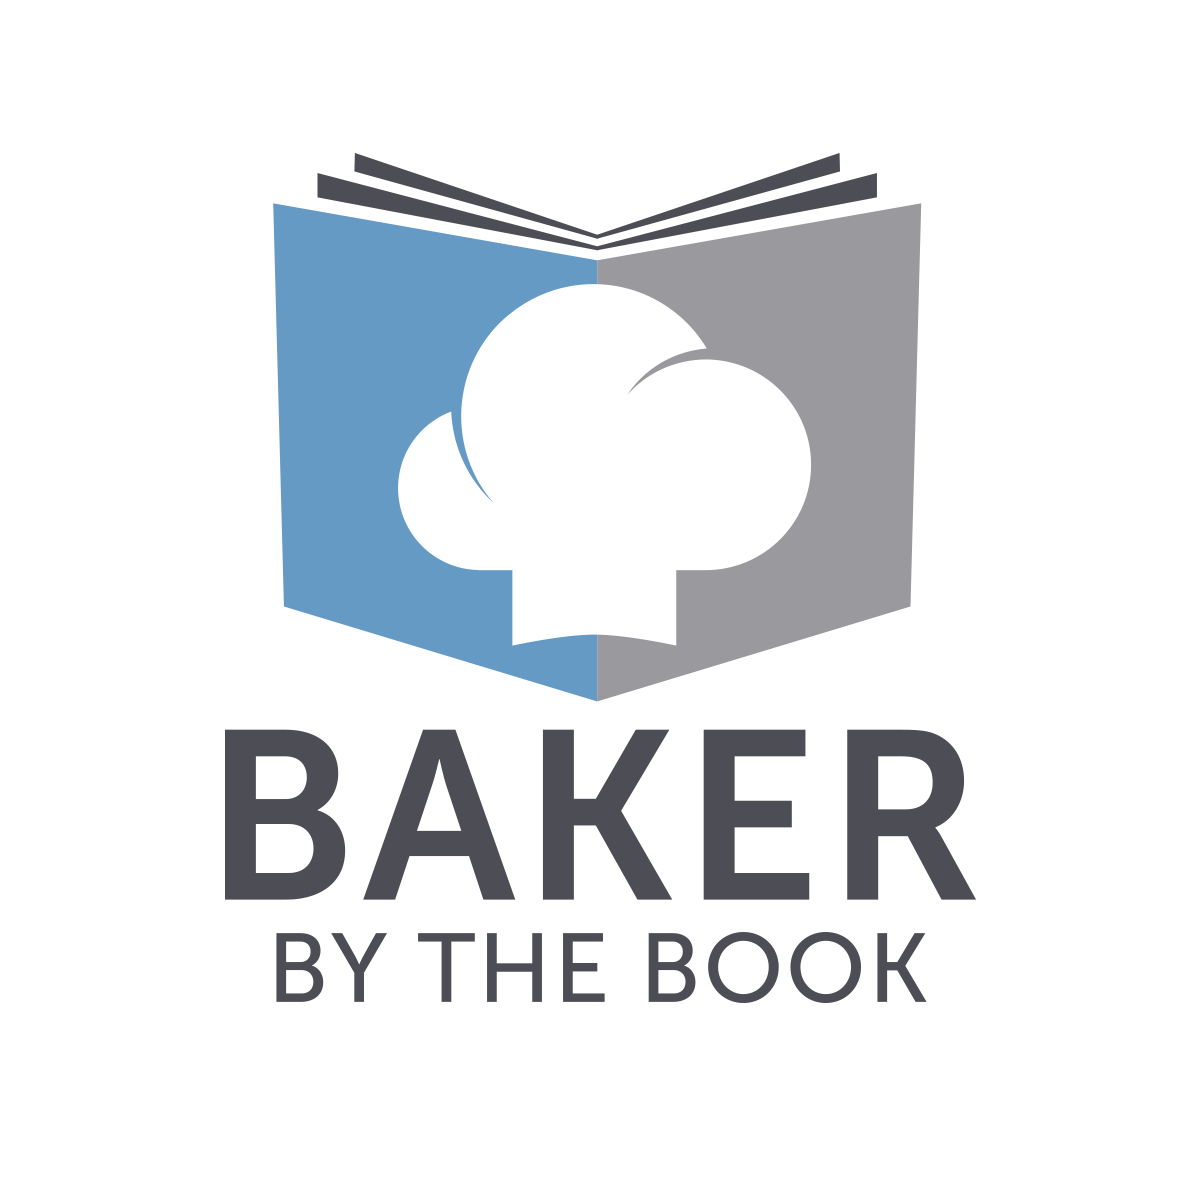 baker by the book logo